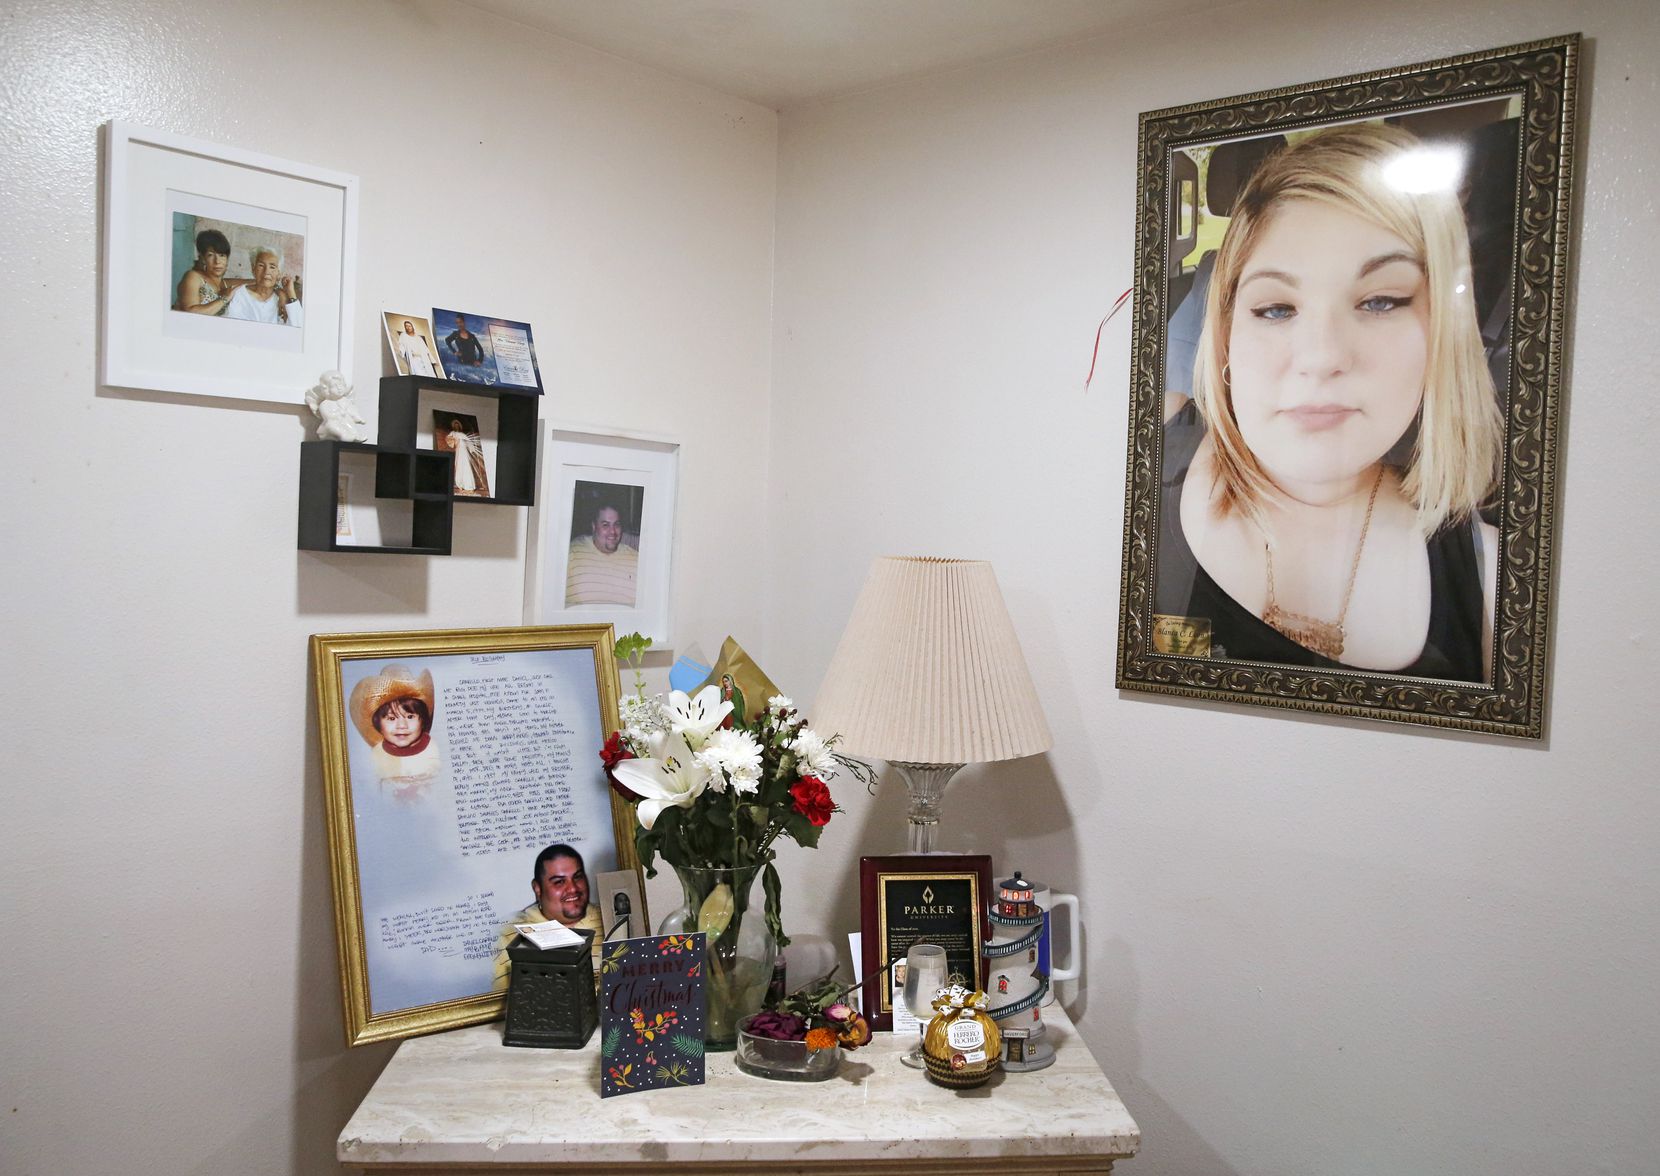 Claudio Sanchez created an altar to family members he's lost, including his fiancee, Blanca Leon, whose portrait hangs on the wall.  